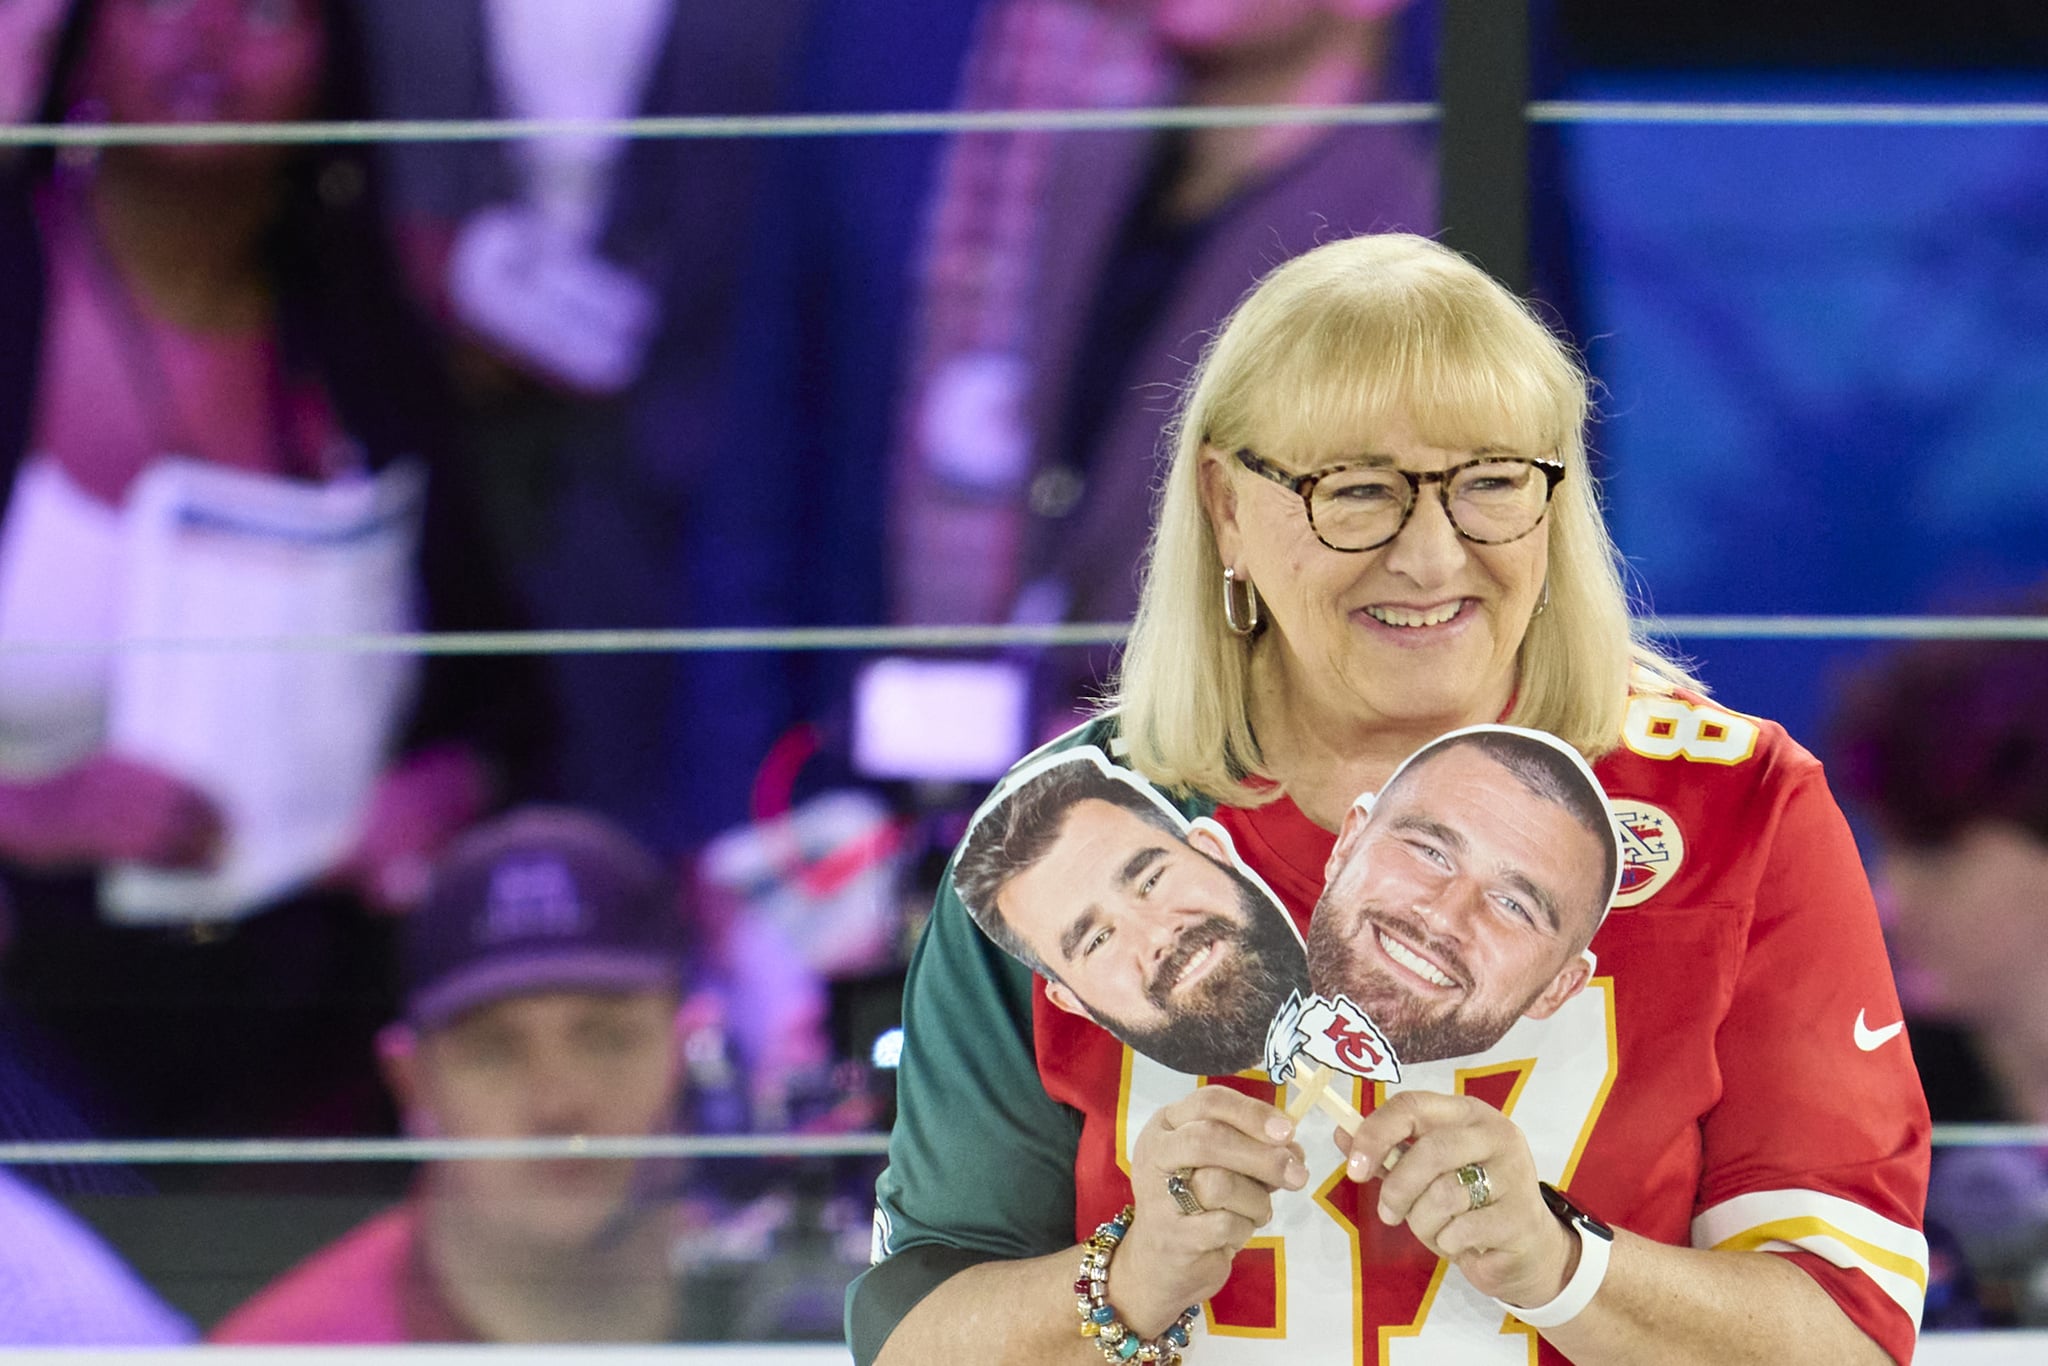 Donna Kelce holds up photos of her sons, Jason Kelce #62 of the Philadelphia Eagles and Travis Kelce #87 of the Kansas City Chiefs at Footprint Center on February 6, 2023 in Phoenix, Arizona